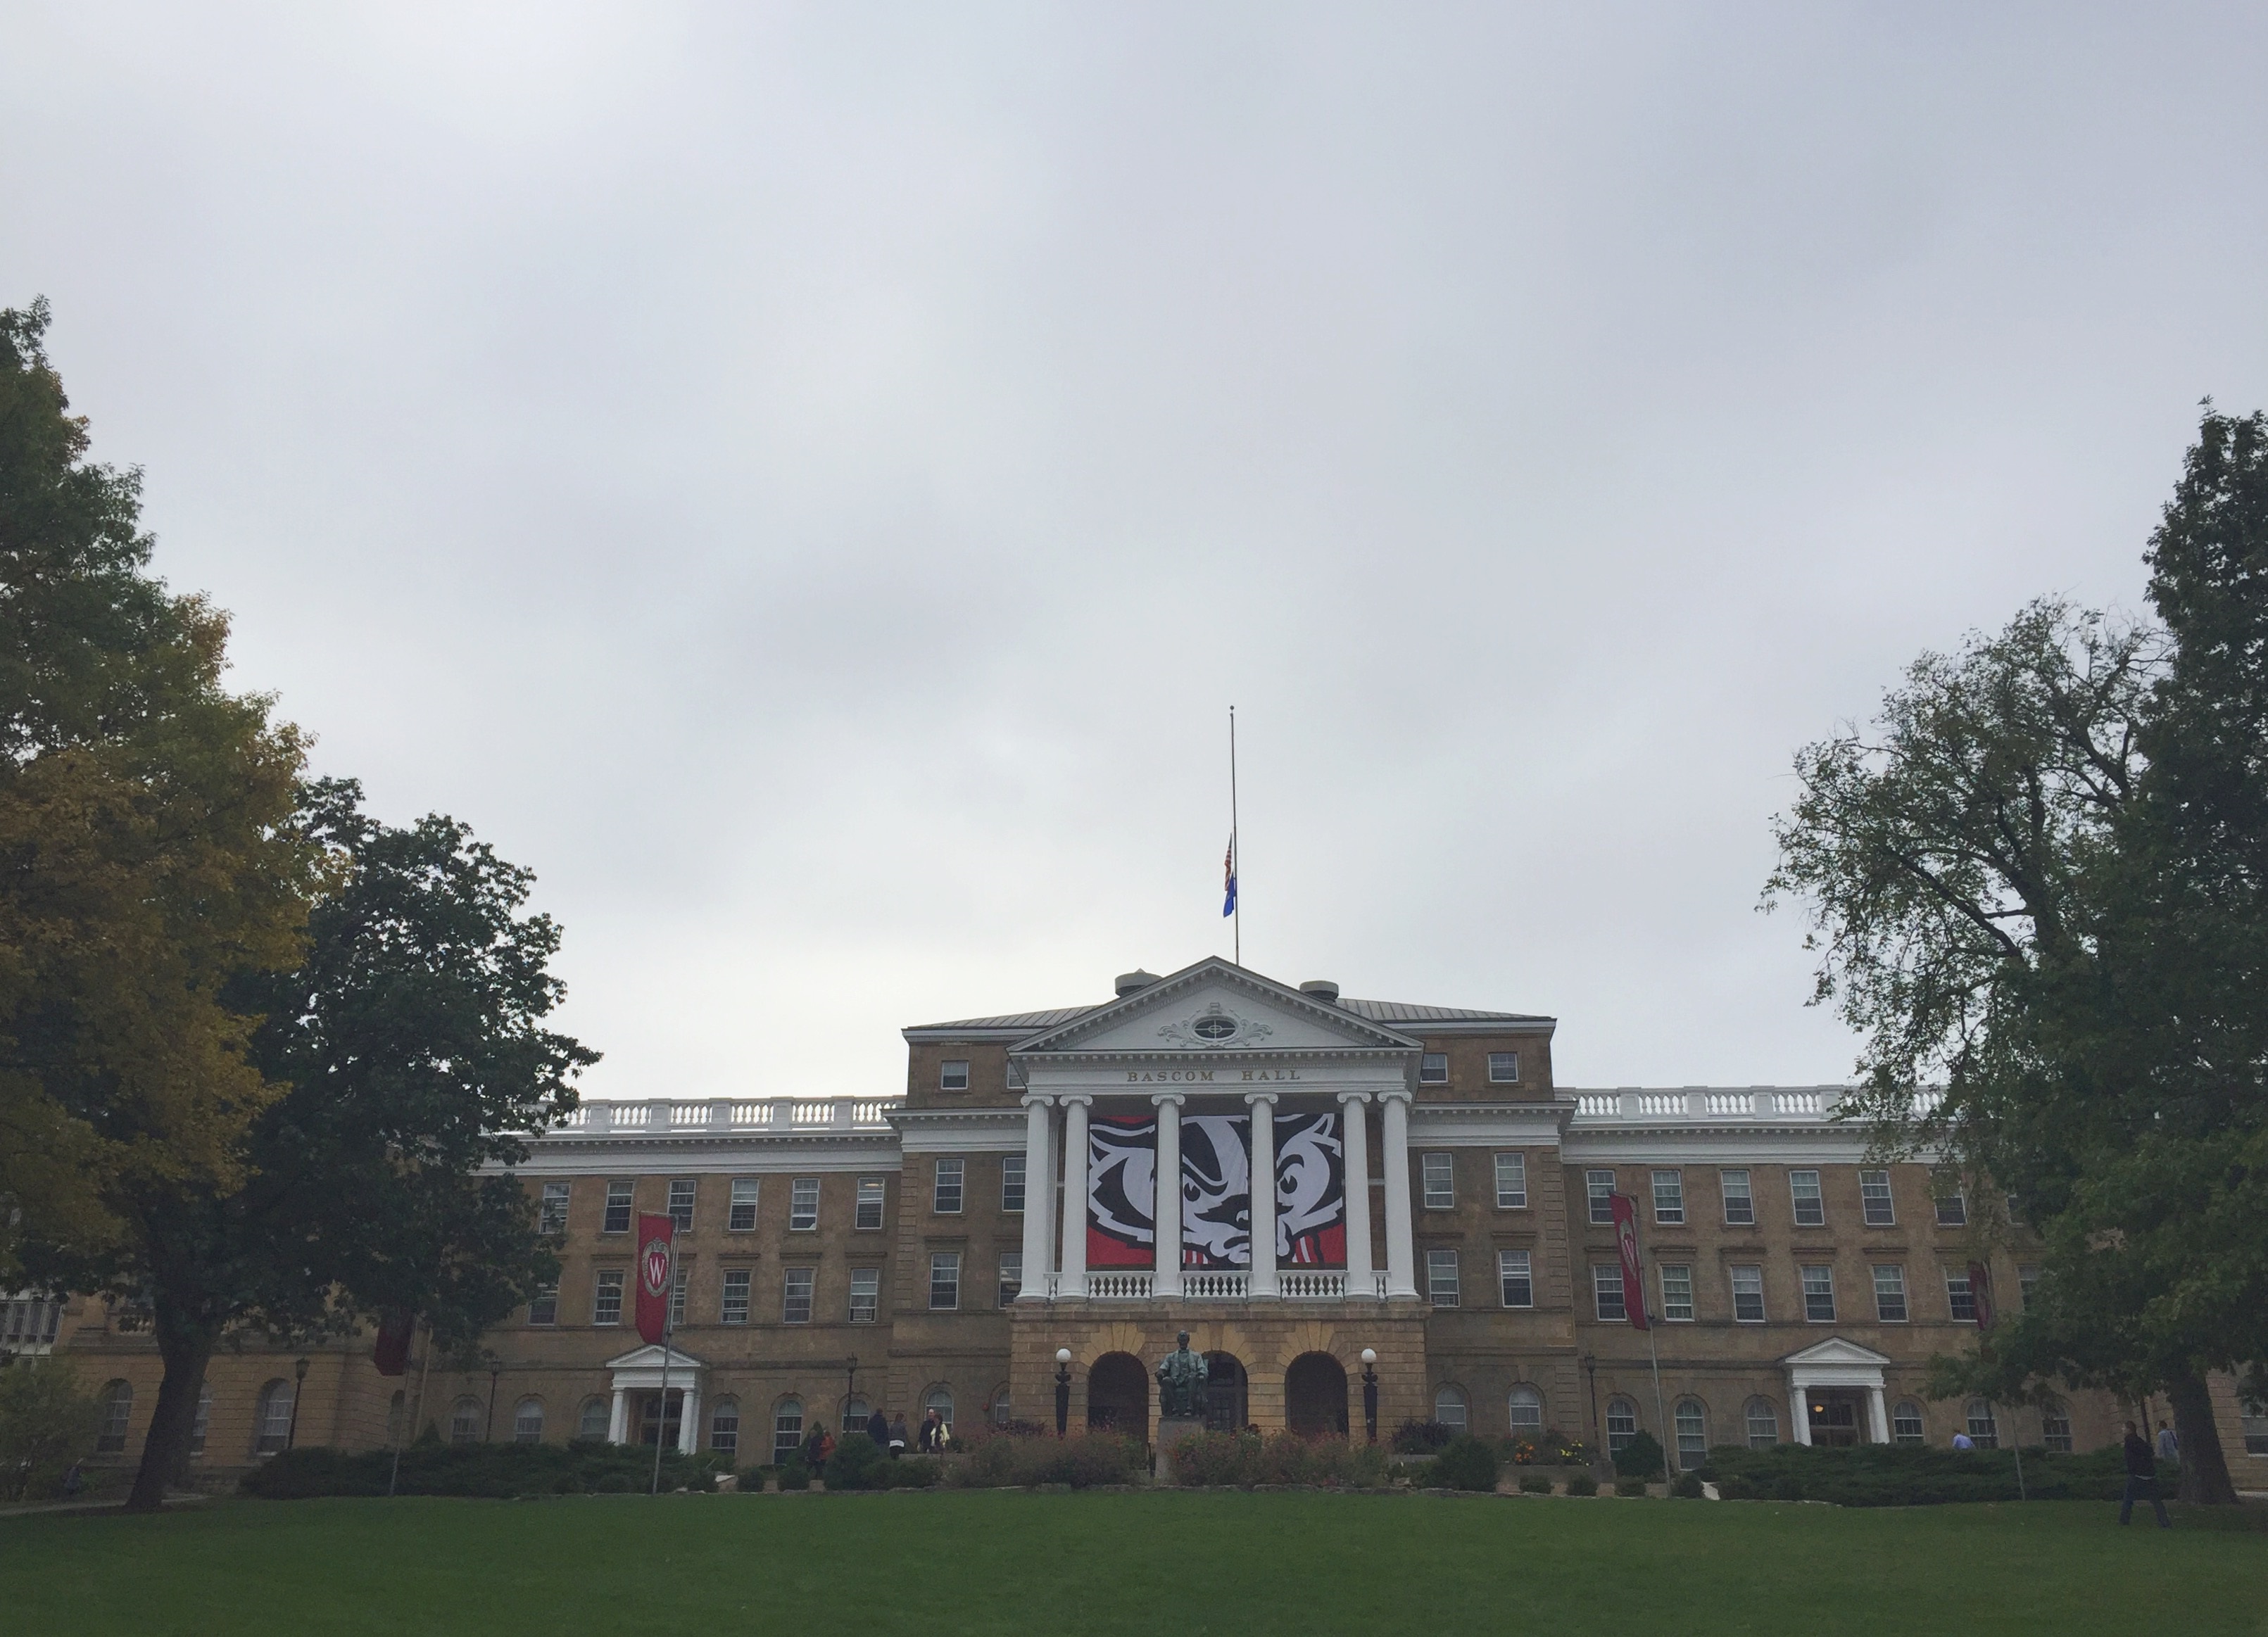 Bascom Hill at UW-Madison on Monday October 5 after the Law Fair